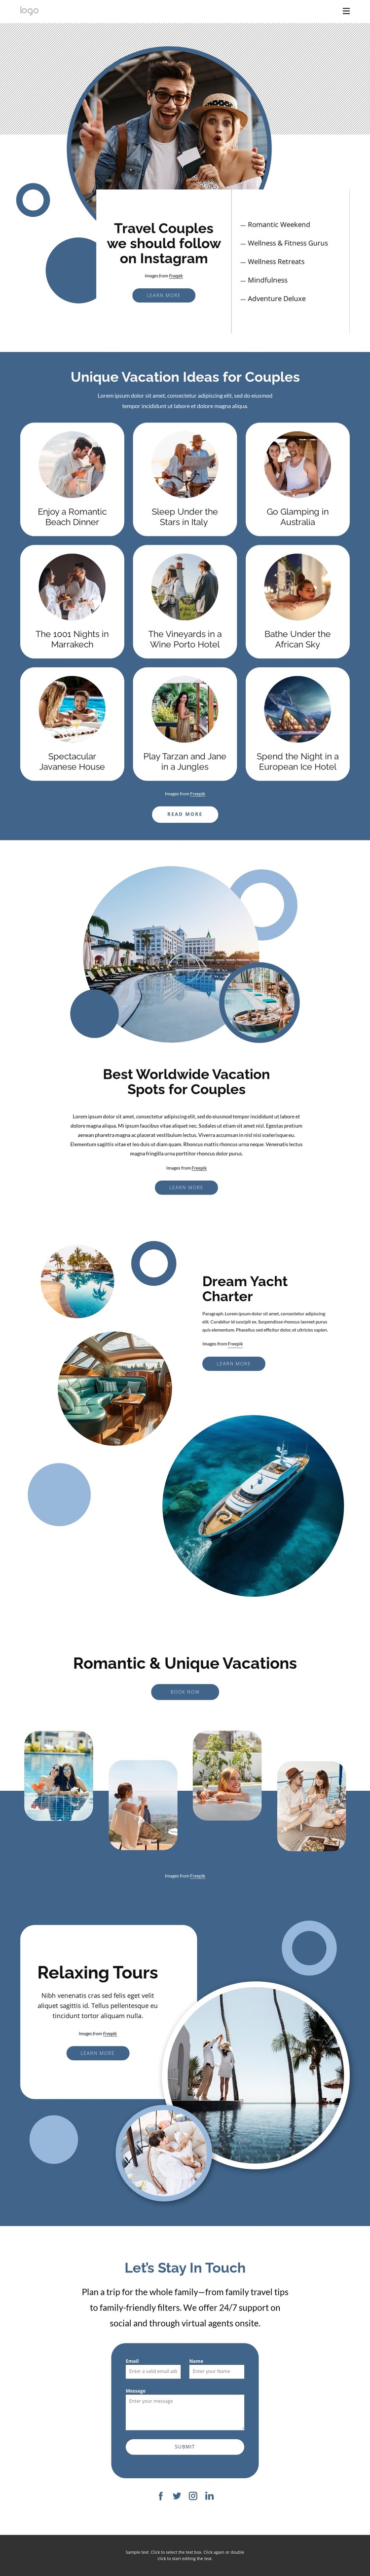 Imagine travelling to some of the most amazing places HTML5 Template